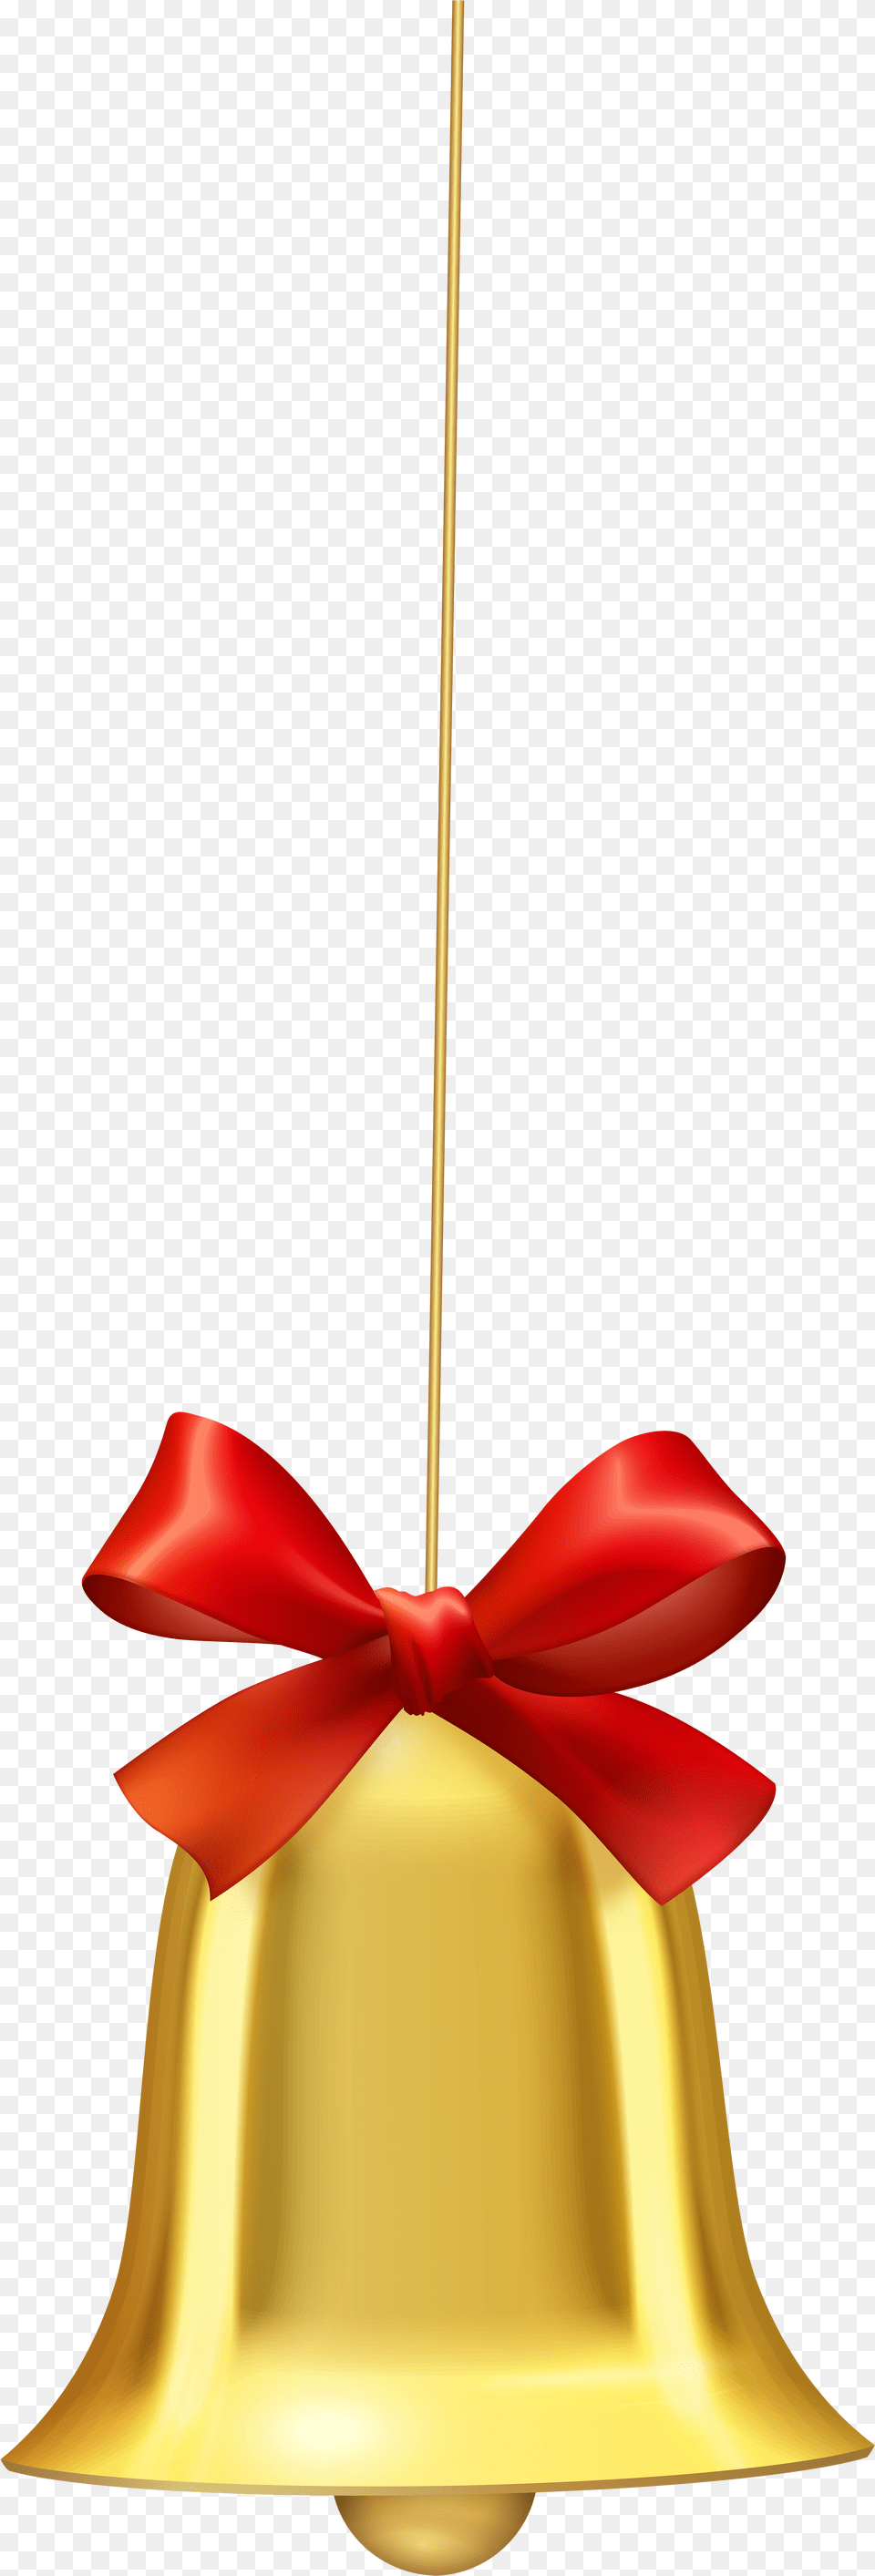 Christmas Bell Hanging Png